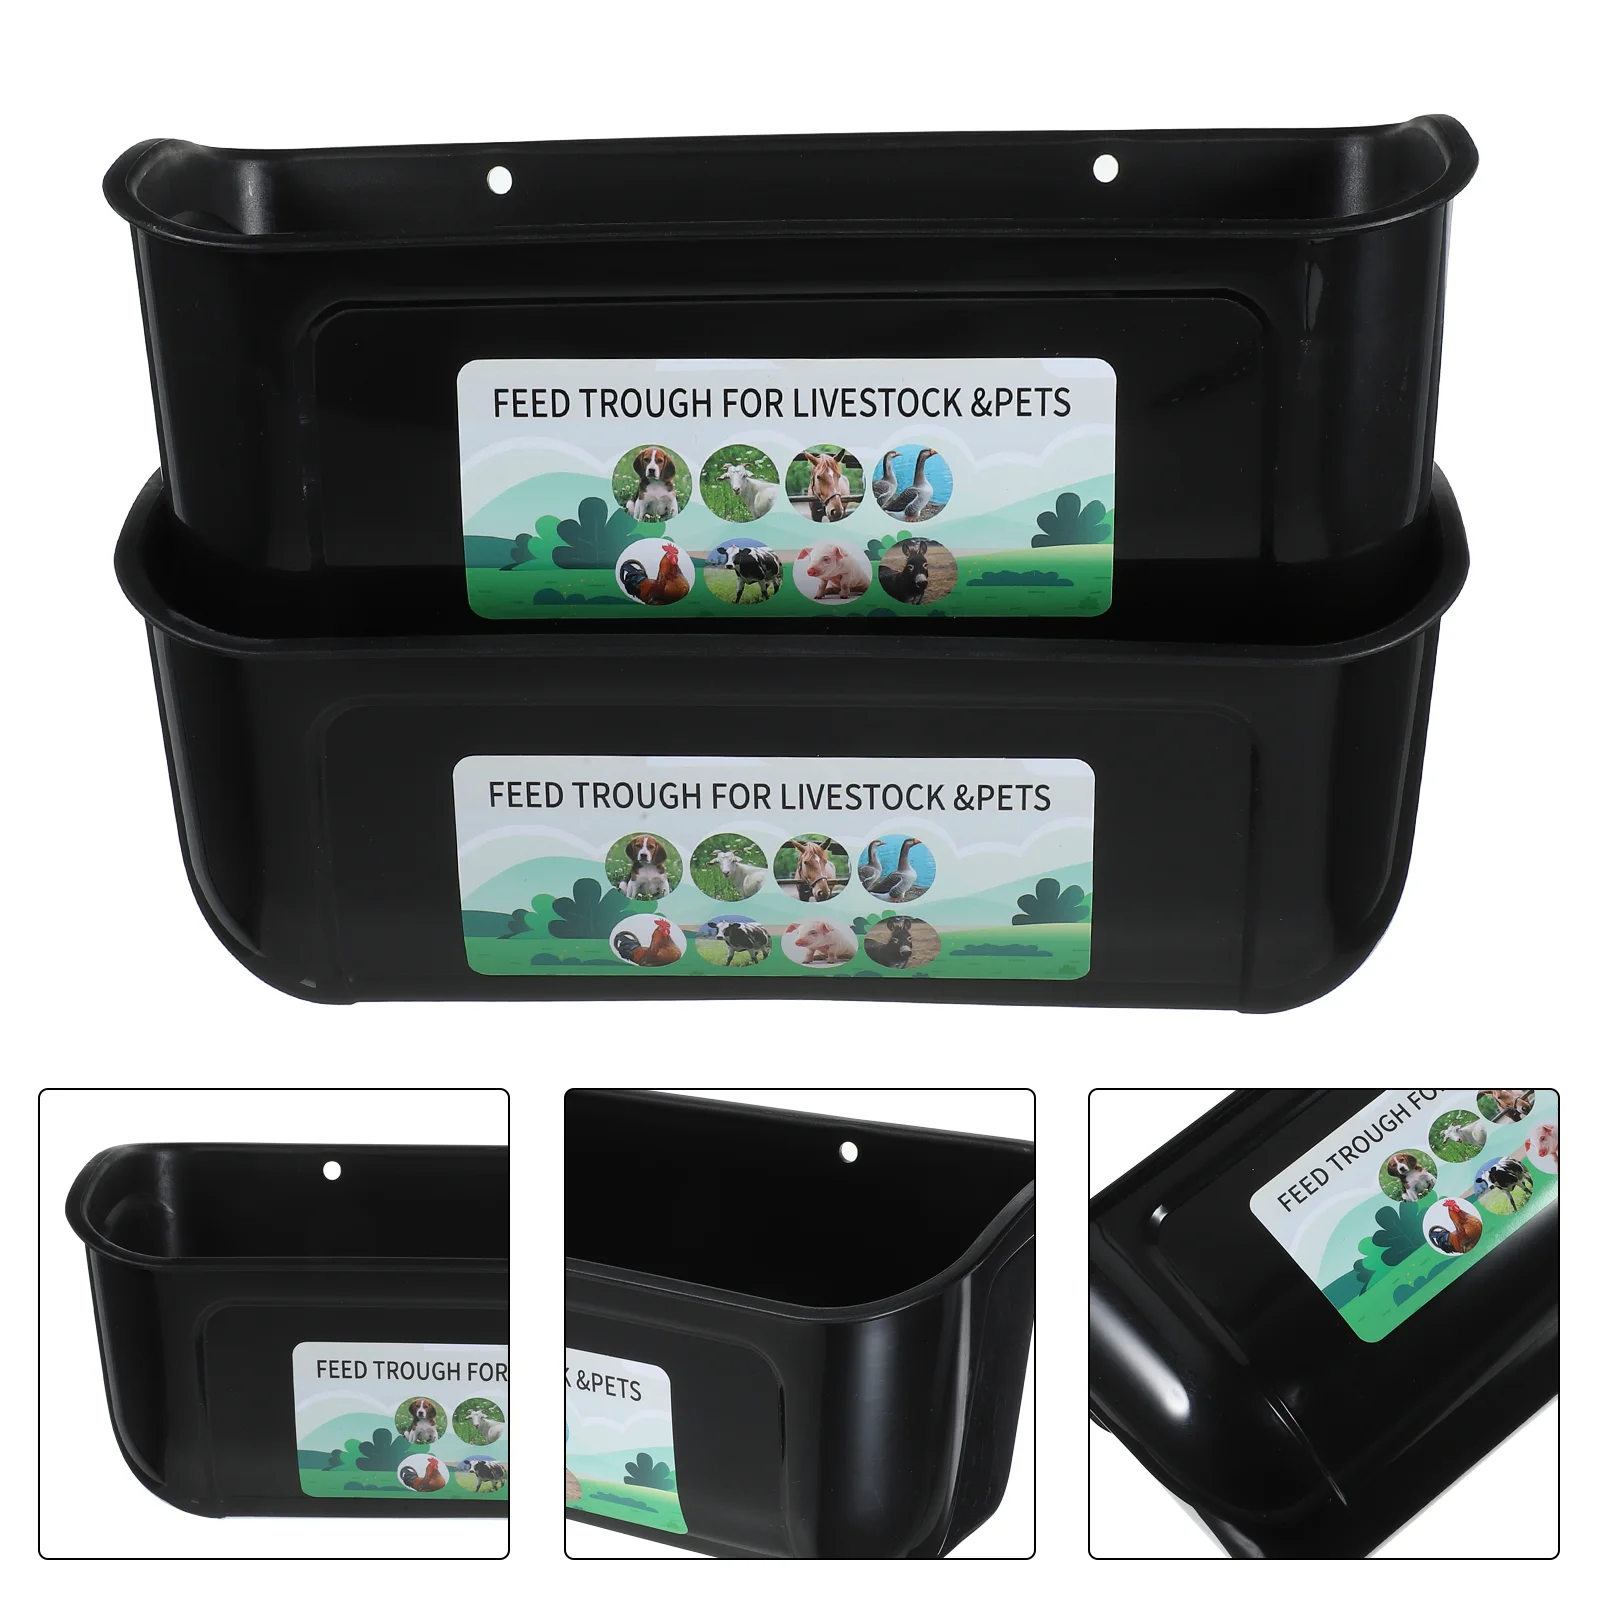 

2 Pcs Food Feeder Trough Feeding Container Horse Bucket Chick Birds Groove Chicken Supplies Your Chickens Poultry